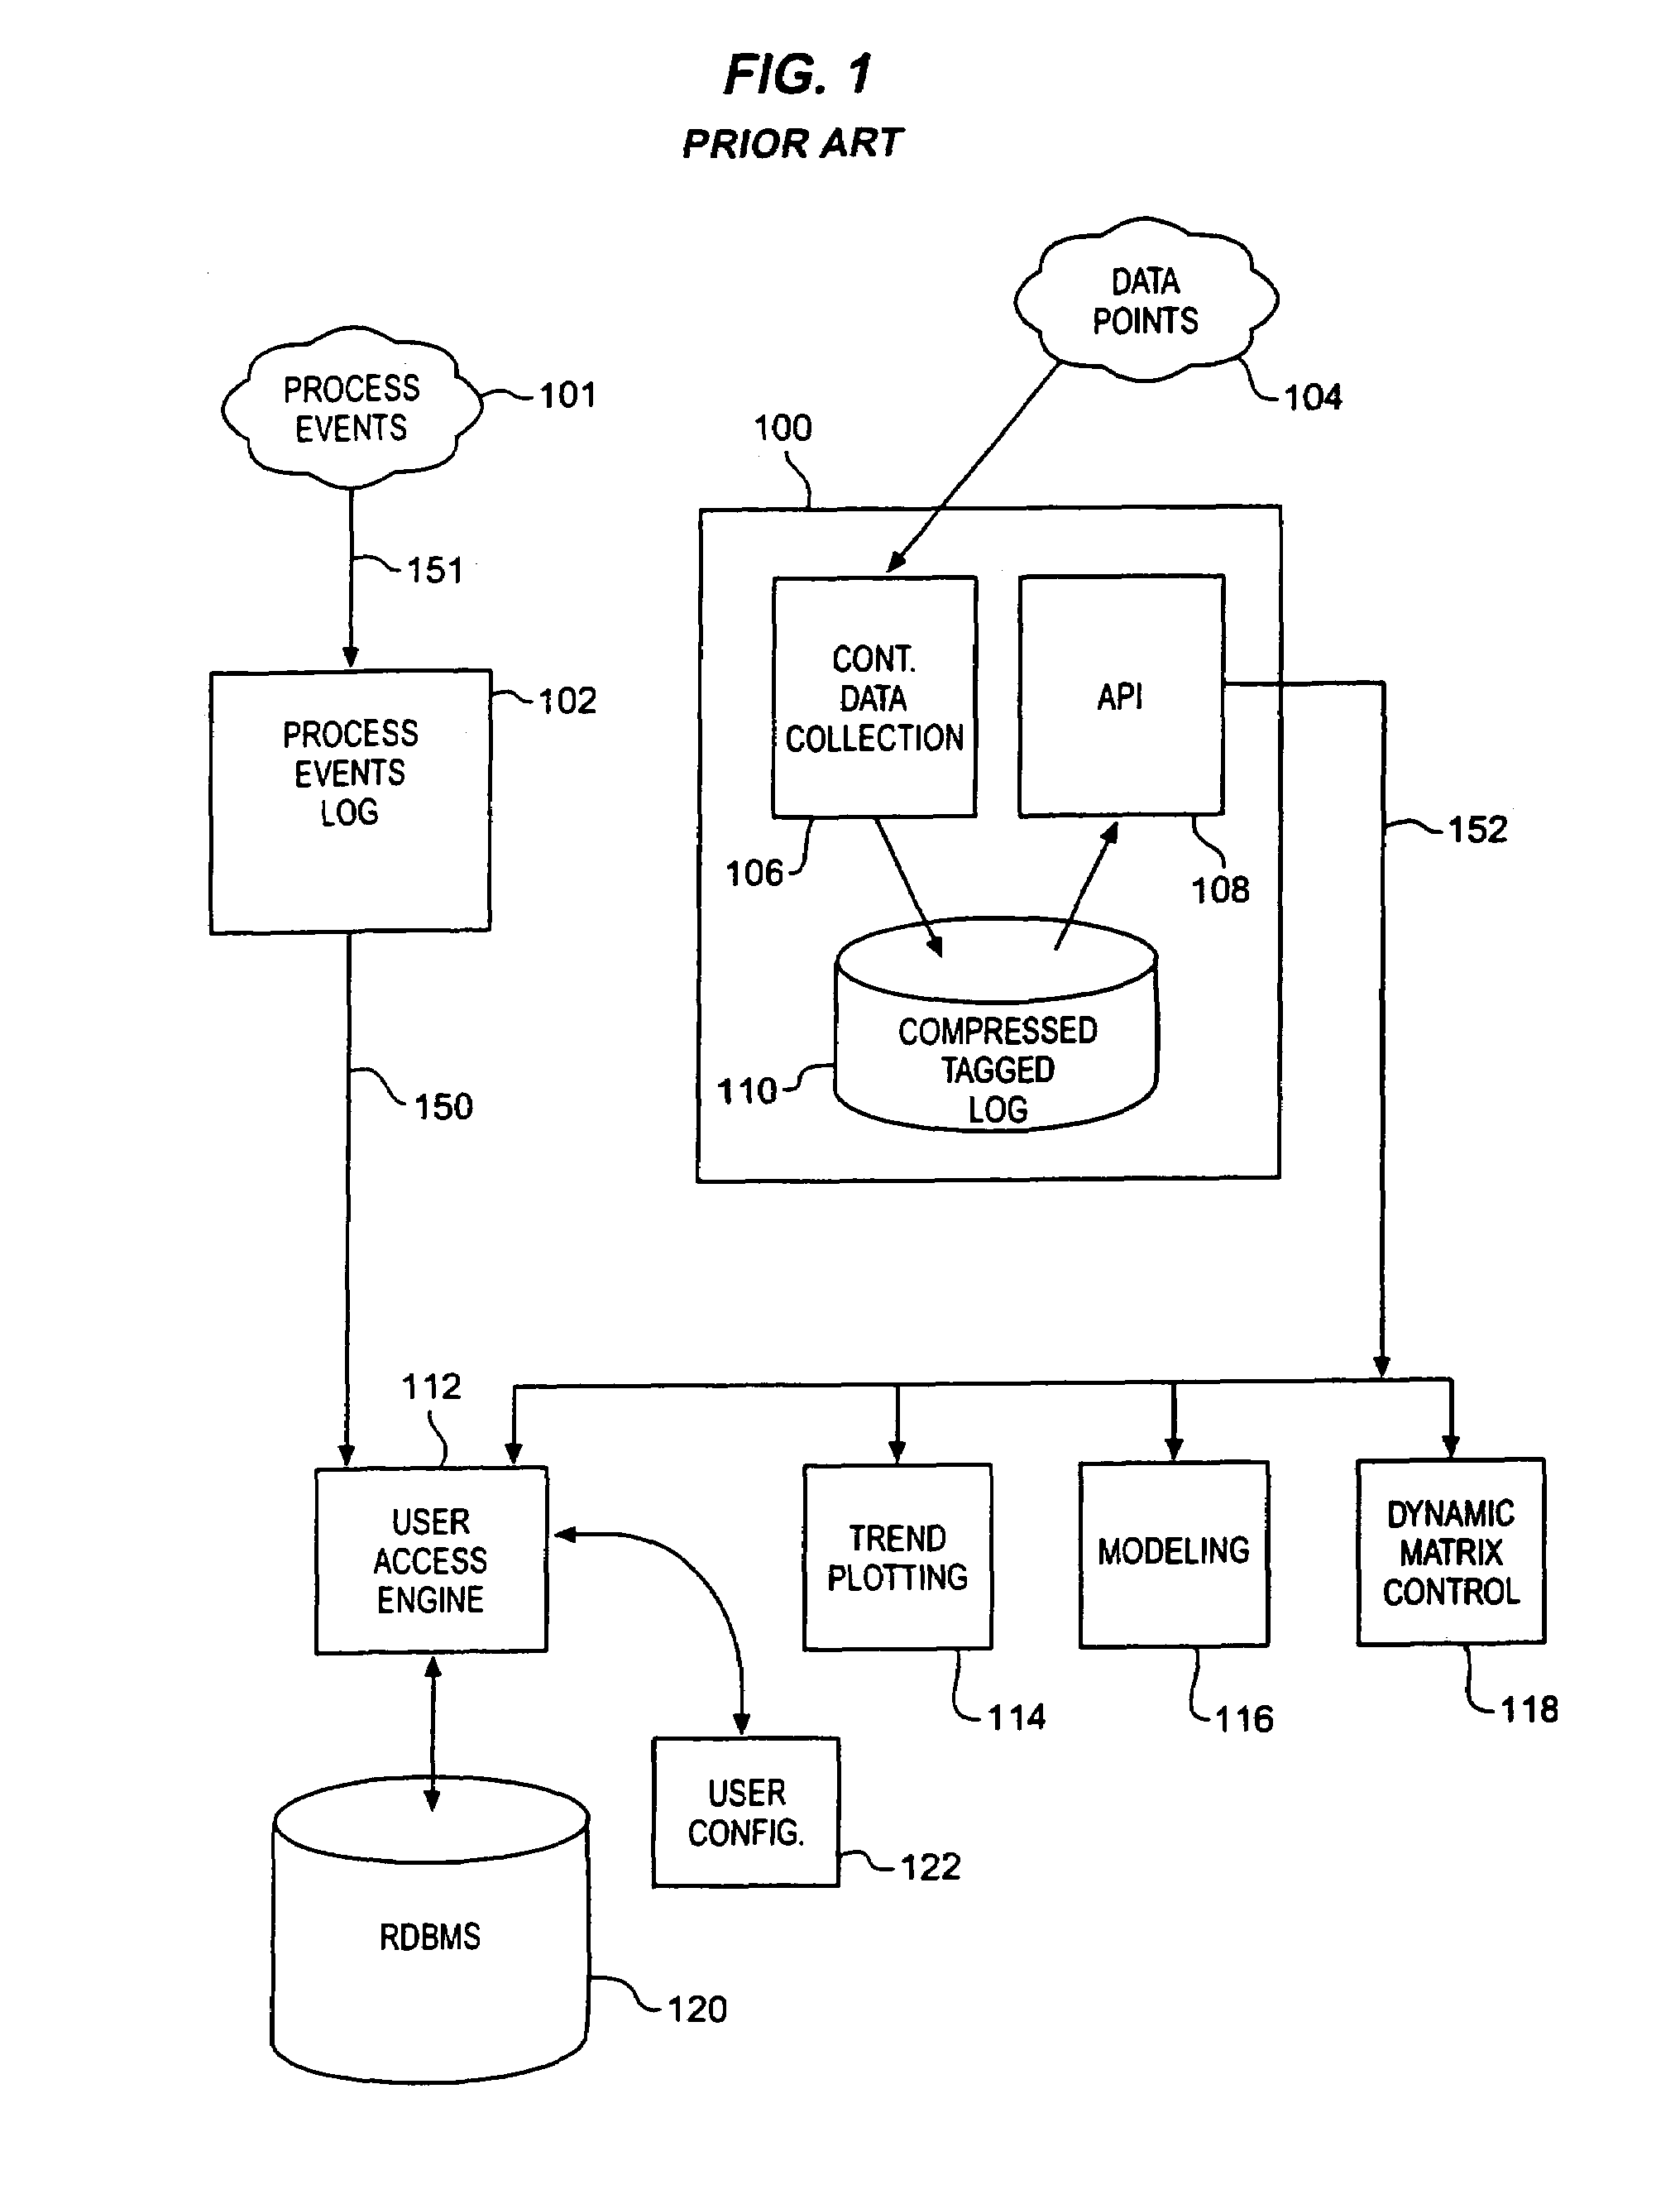 Methods and structure for batch processing event history processing and viewing